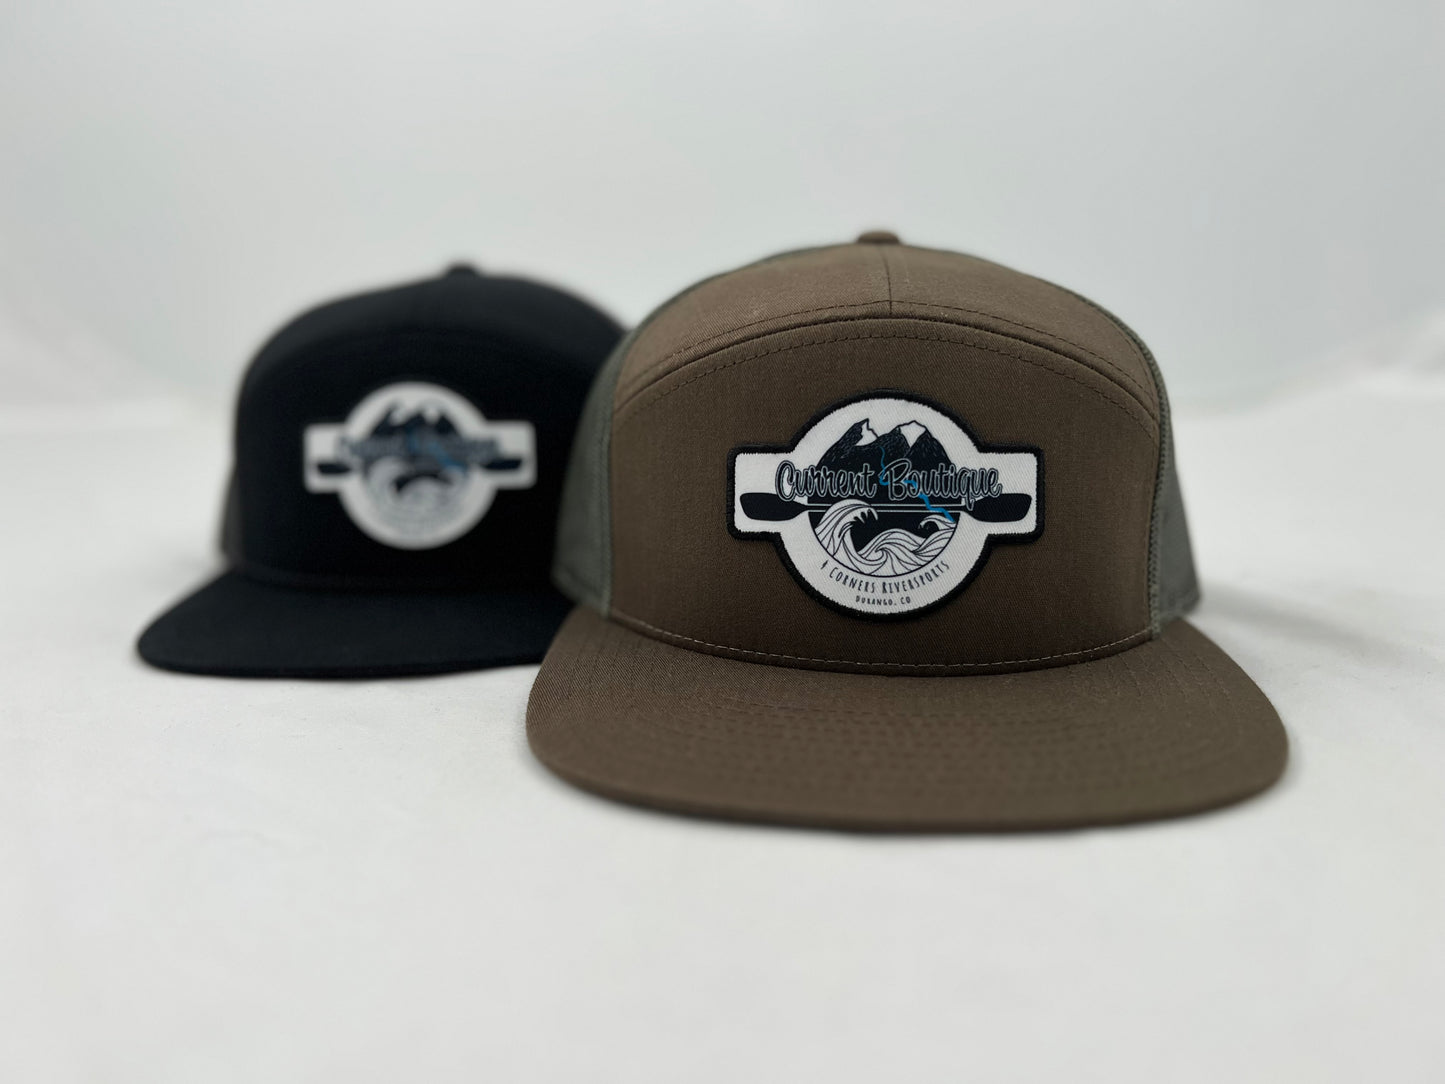 A Captuer Headwear Current Boutique 7 Panel Patch Hat with a logo on it.